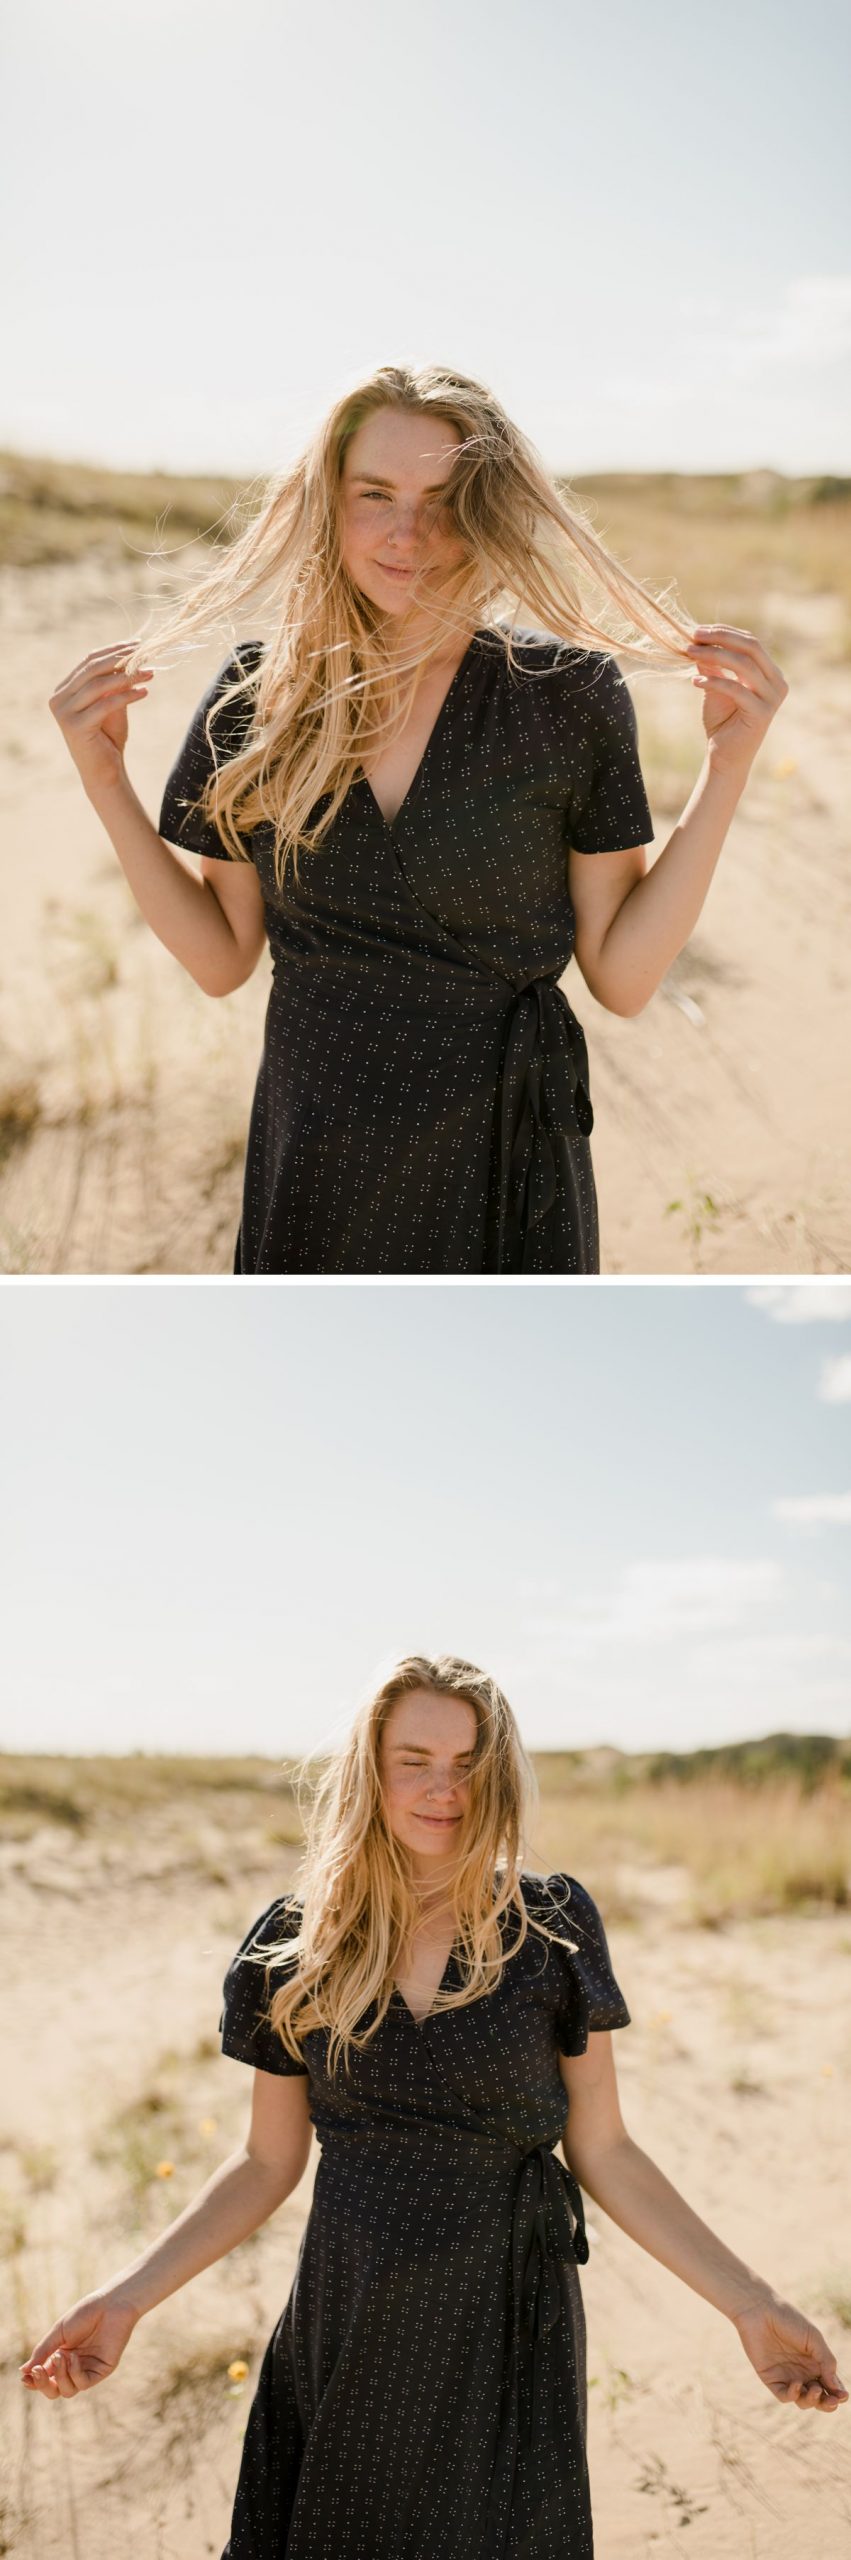 Spirit Sands Manitoba Summer couples photo shoot. Photographed by Vanessa Renae Photography, a Winnipeg wedding photographer and elopement photographer. Desert engagement session.